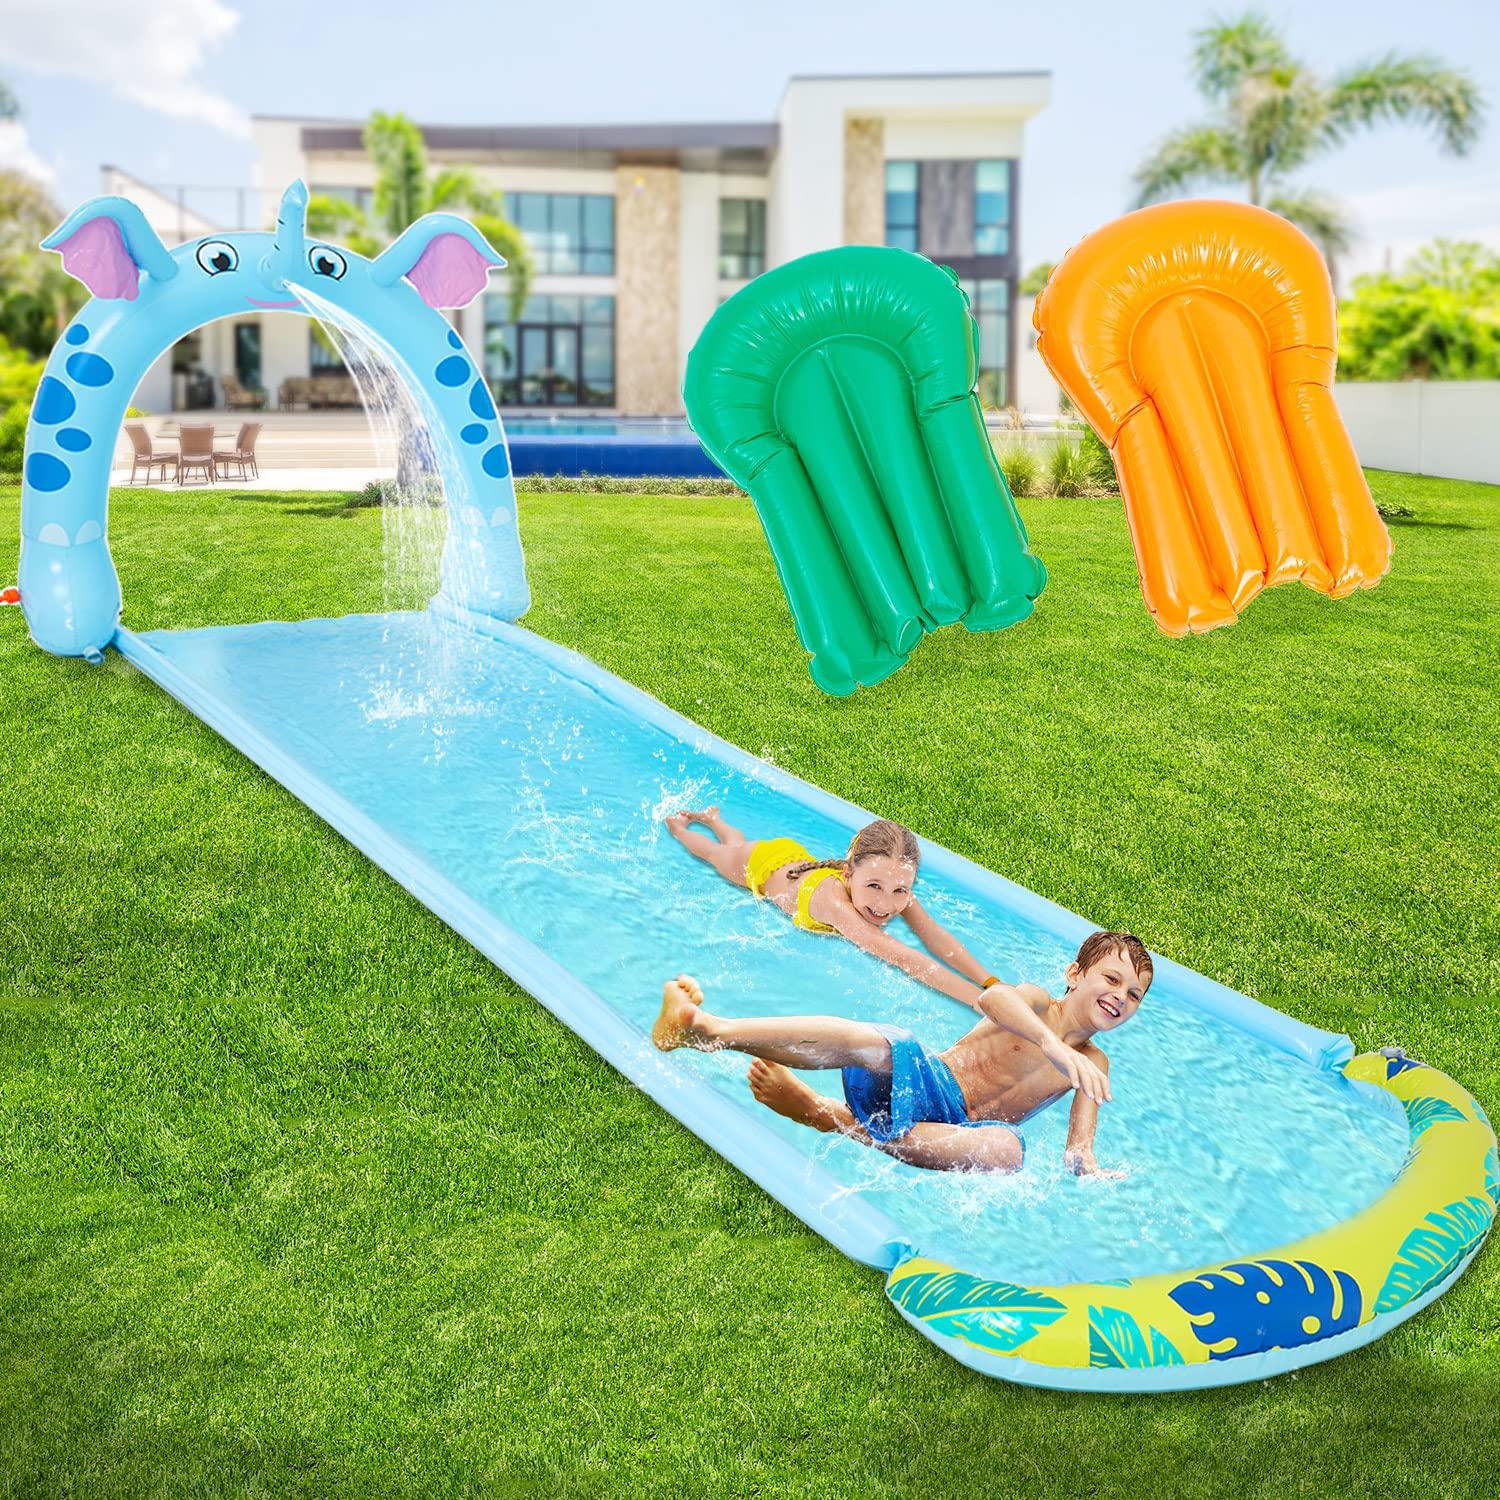 BNLLD, Lawn Slip and Slide Water Slip with 2 Bodyboards, Spraying Inflatable Water Slide Backyard and Outdoor Swimming Pool Games Summer Toy with Build in Sprinkler for Kids Boys Girls Ages 3Y+